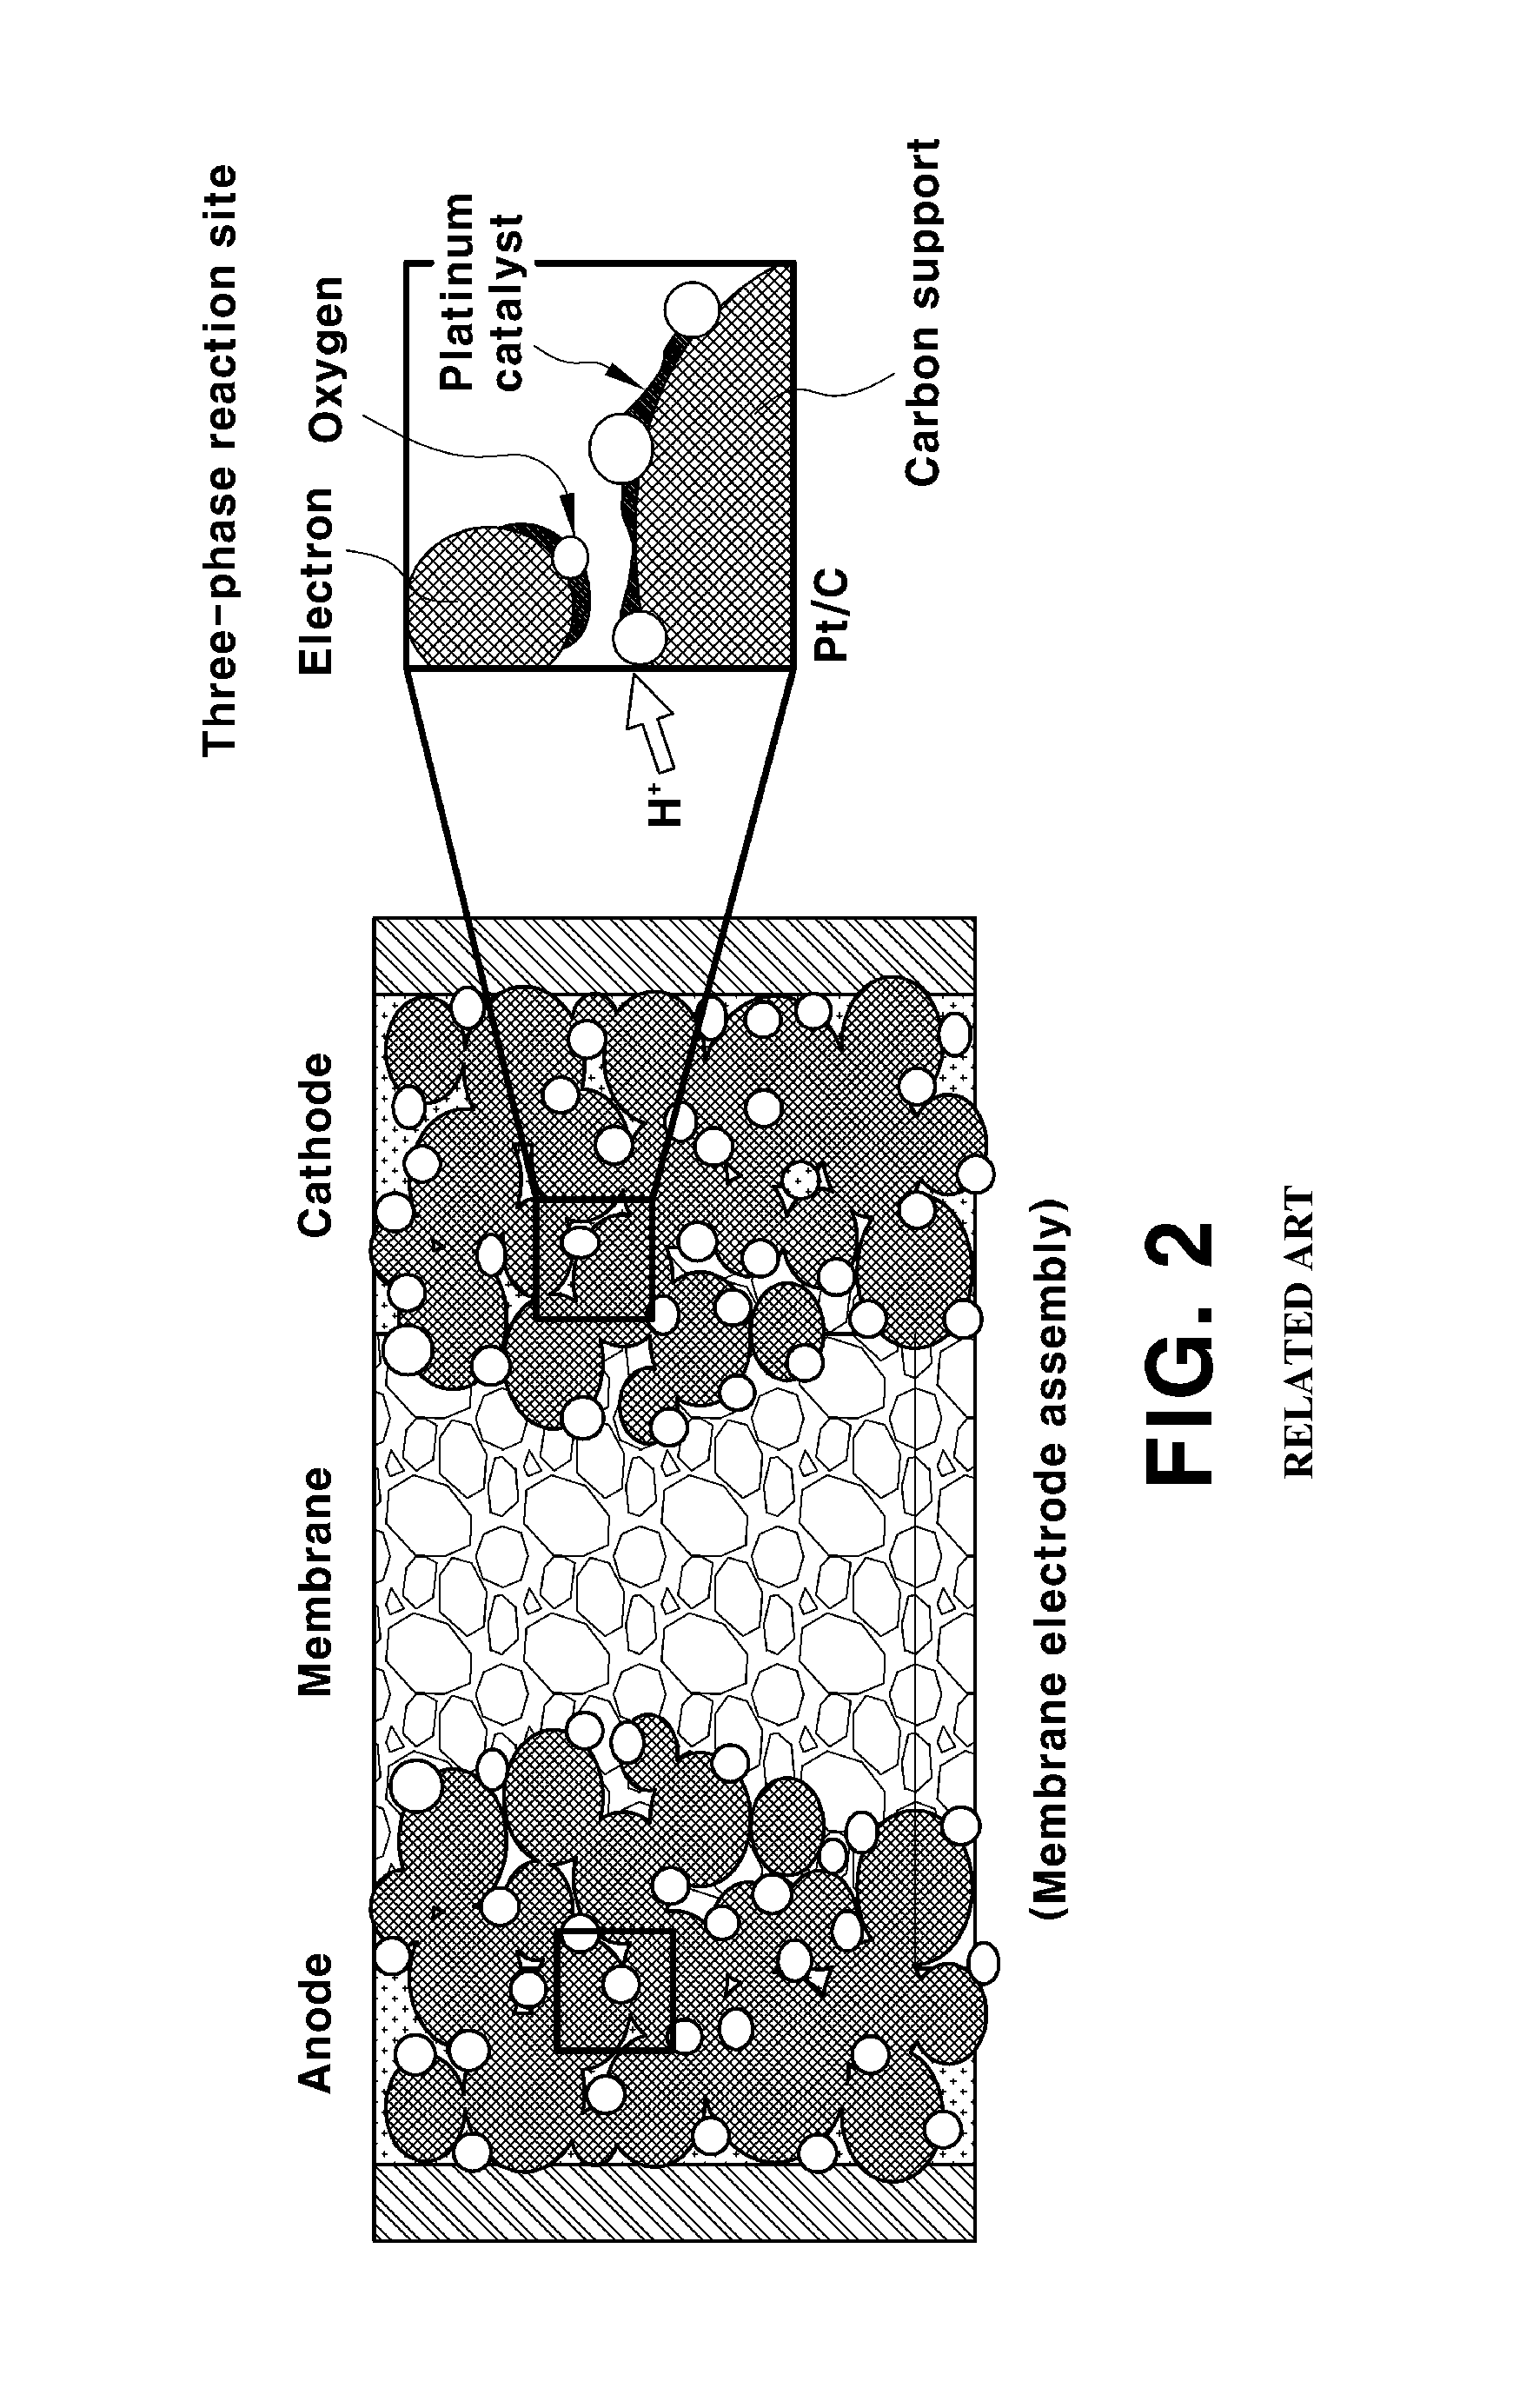 Performance recovery method for fuel cell stack